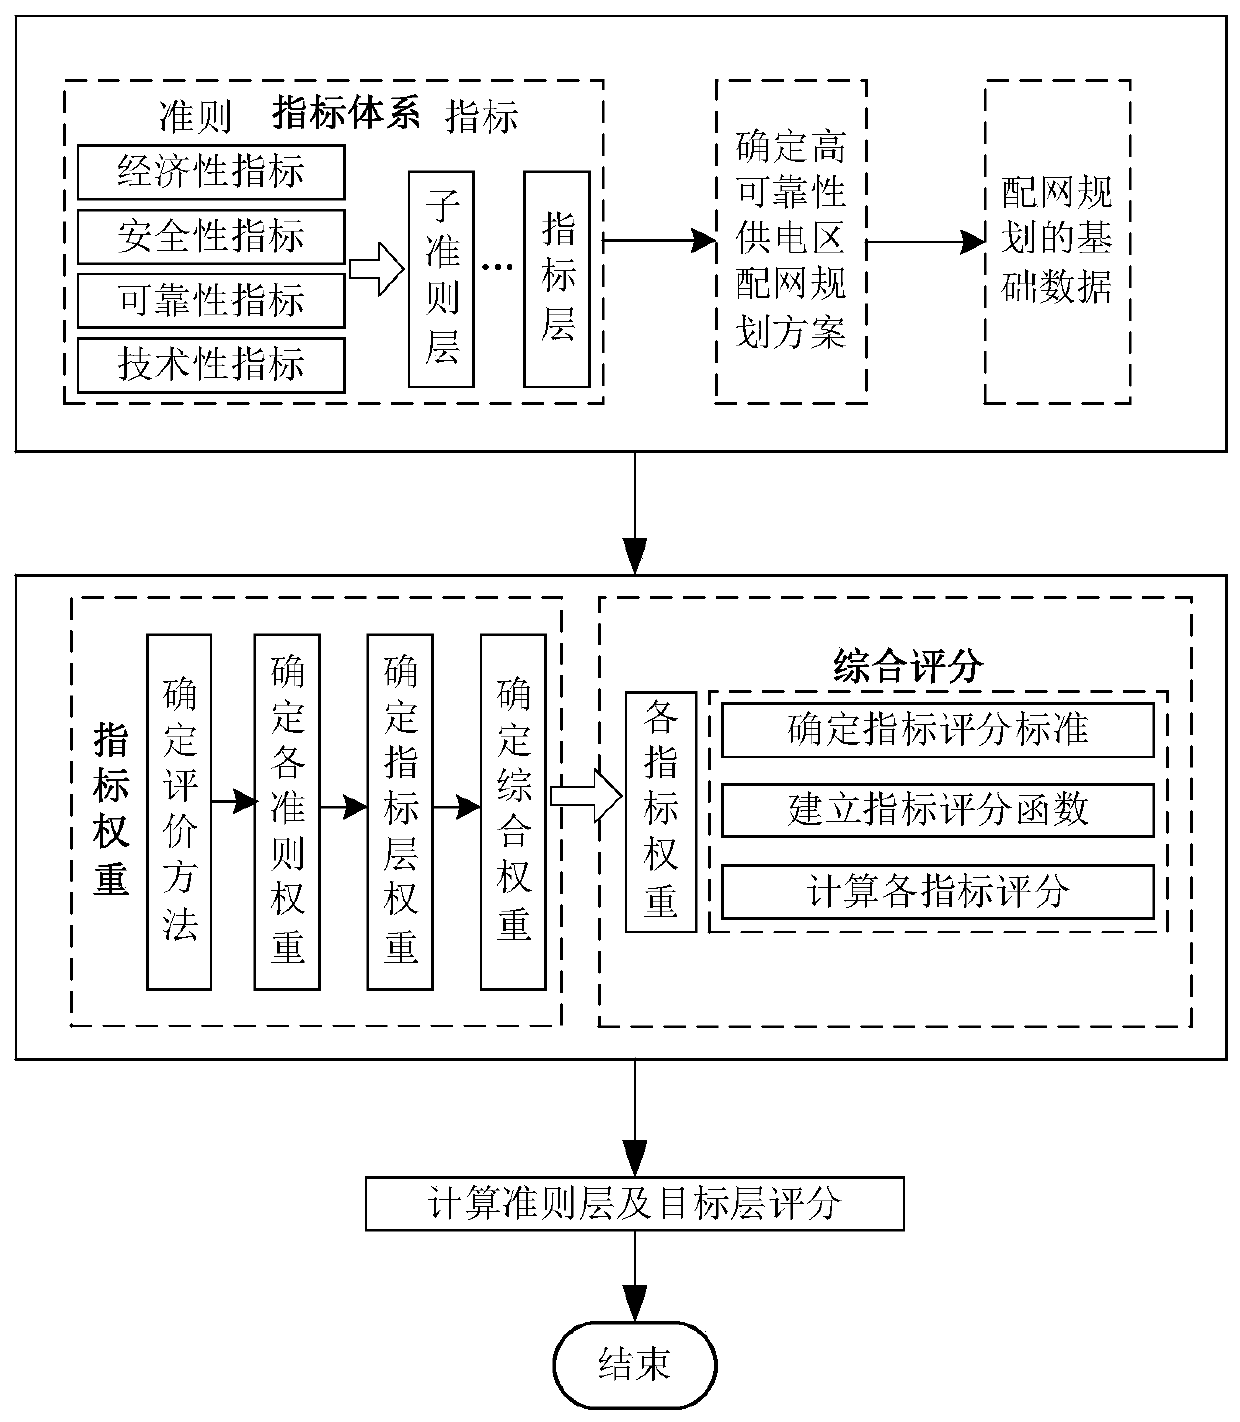 A high-reliability power supply area distribution network planning effect comprehensive evaluation method